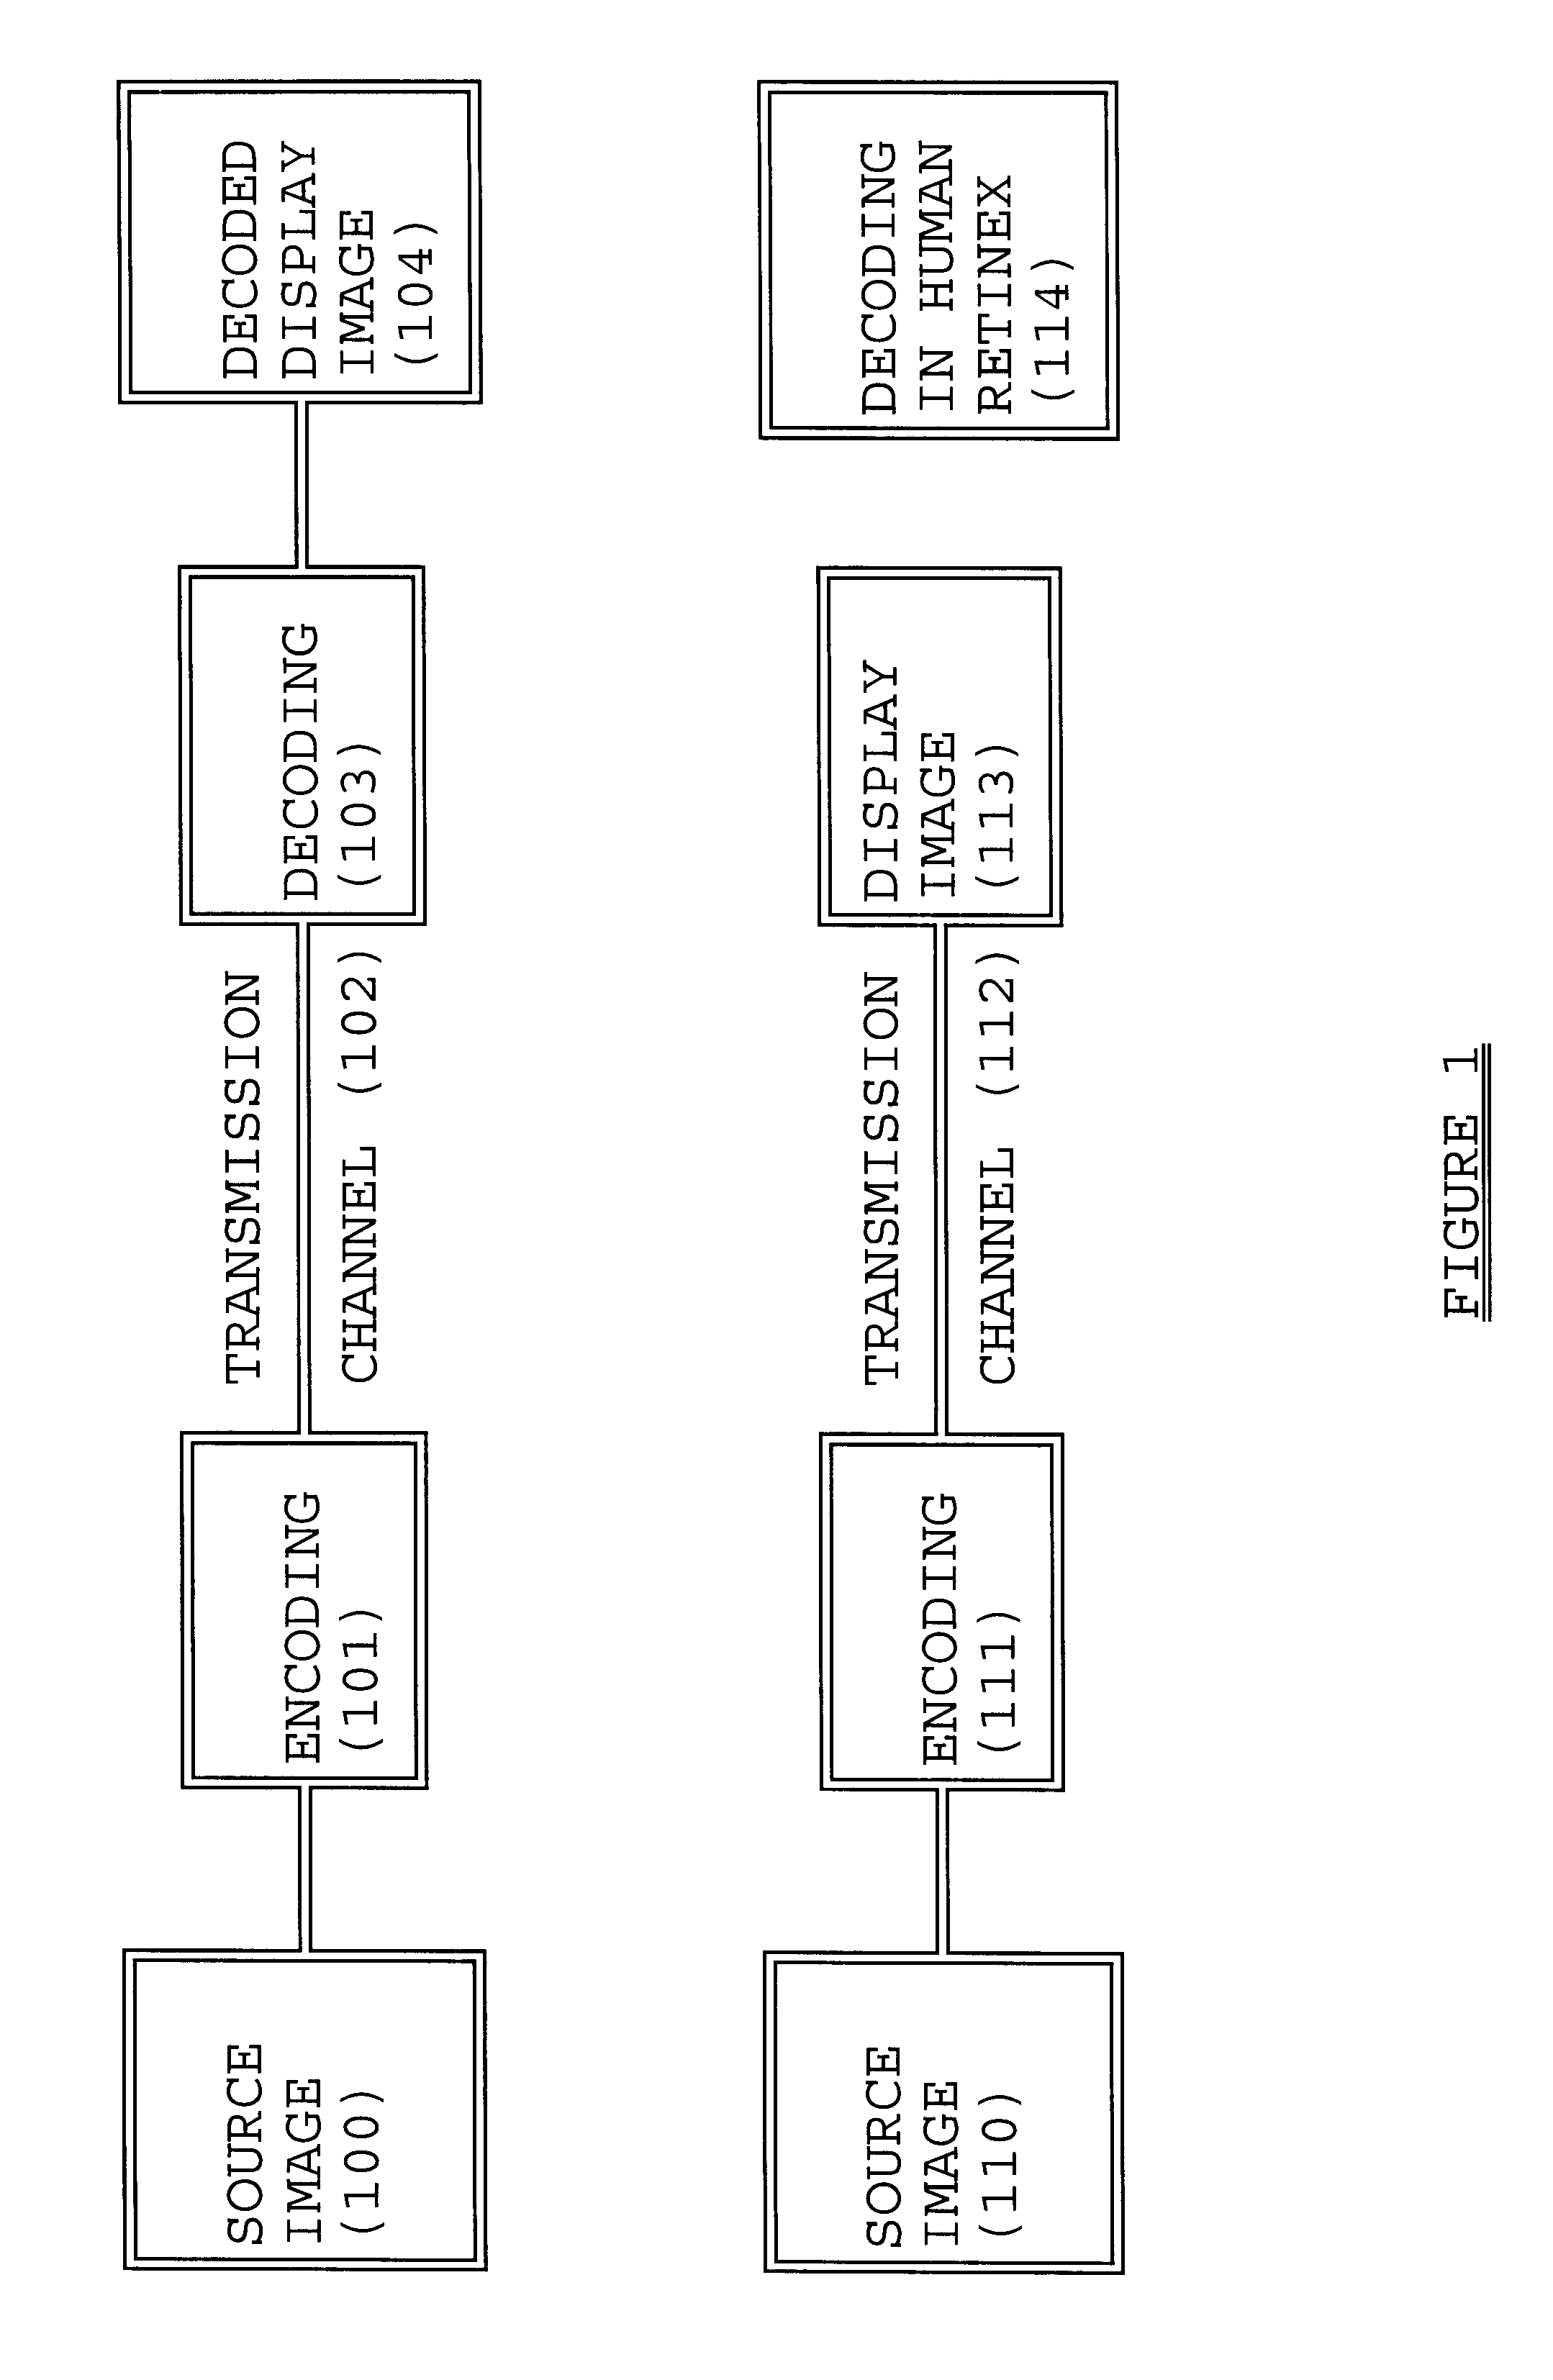 Methods and devices for time-varying selection and arrangement of data points with particular application to the creation of NTSC-compatible HDTV signals